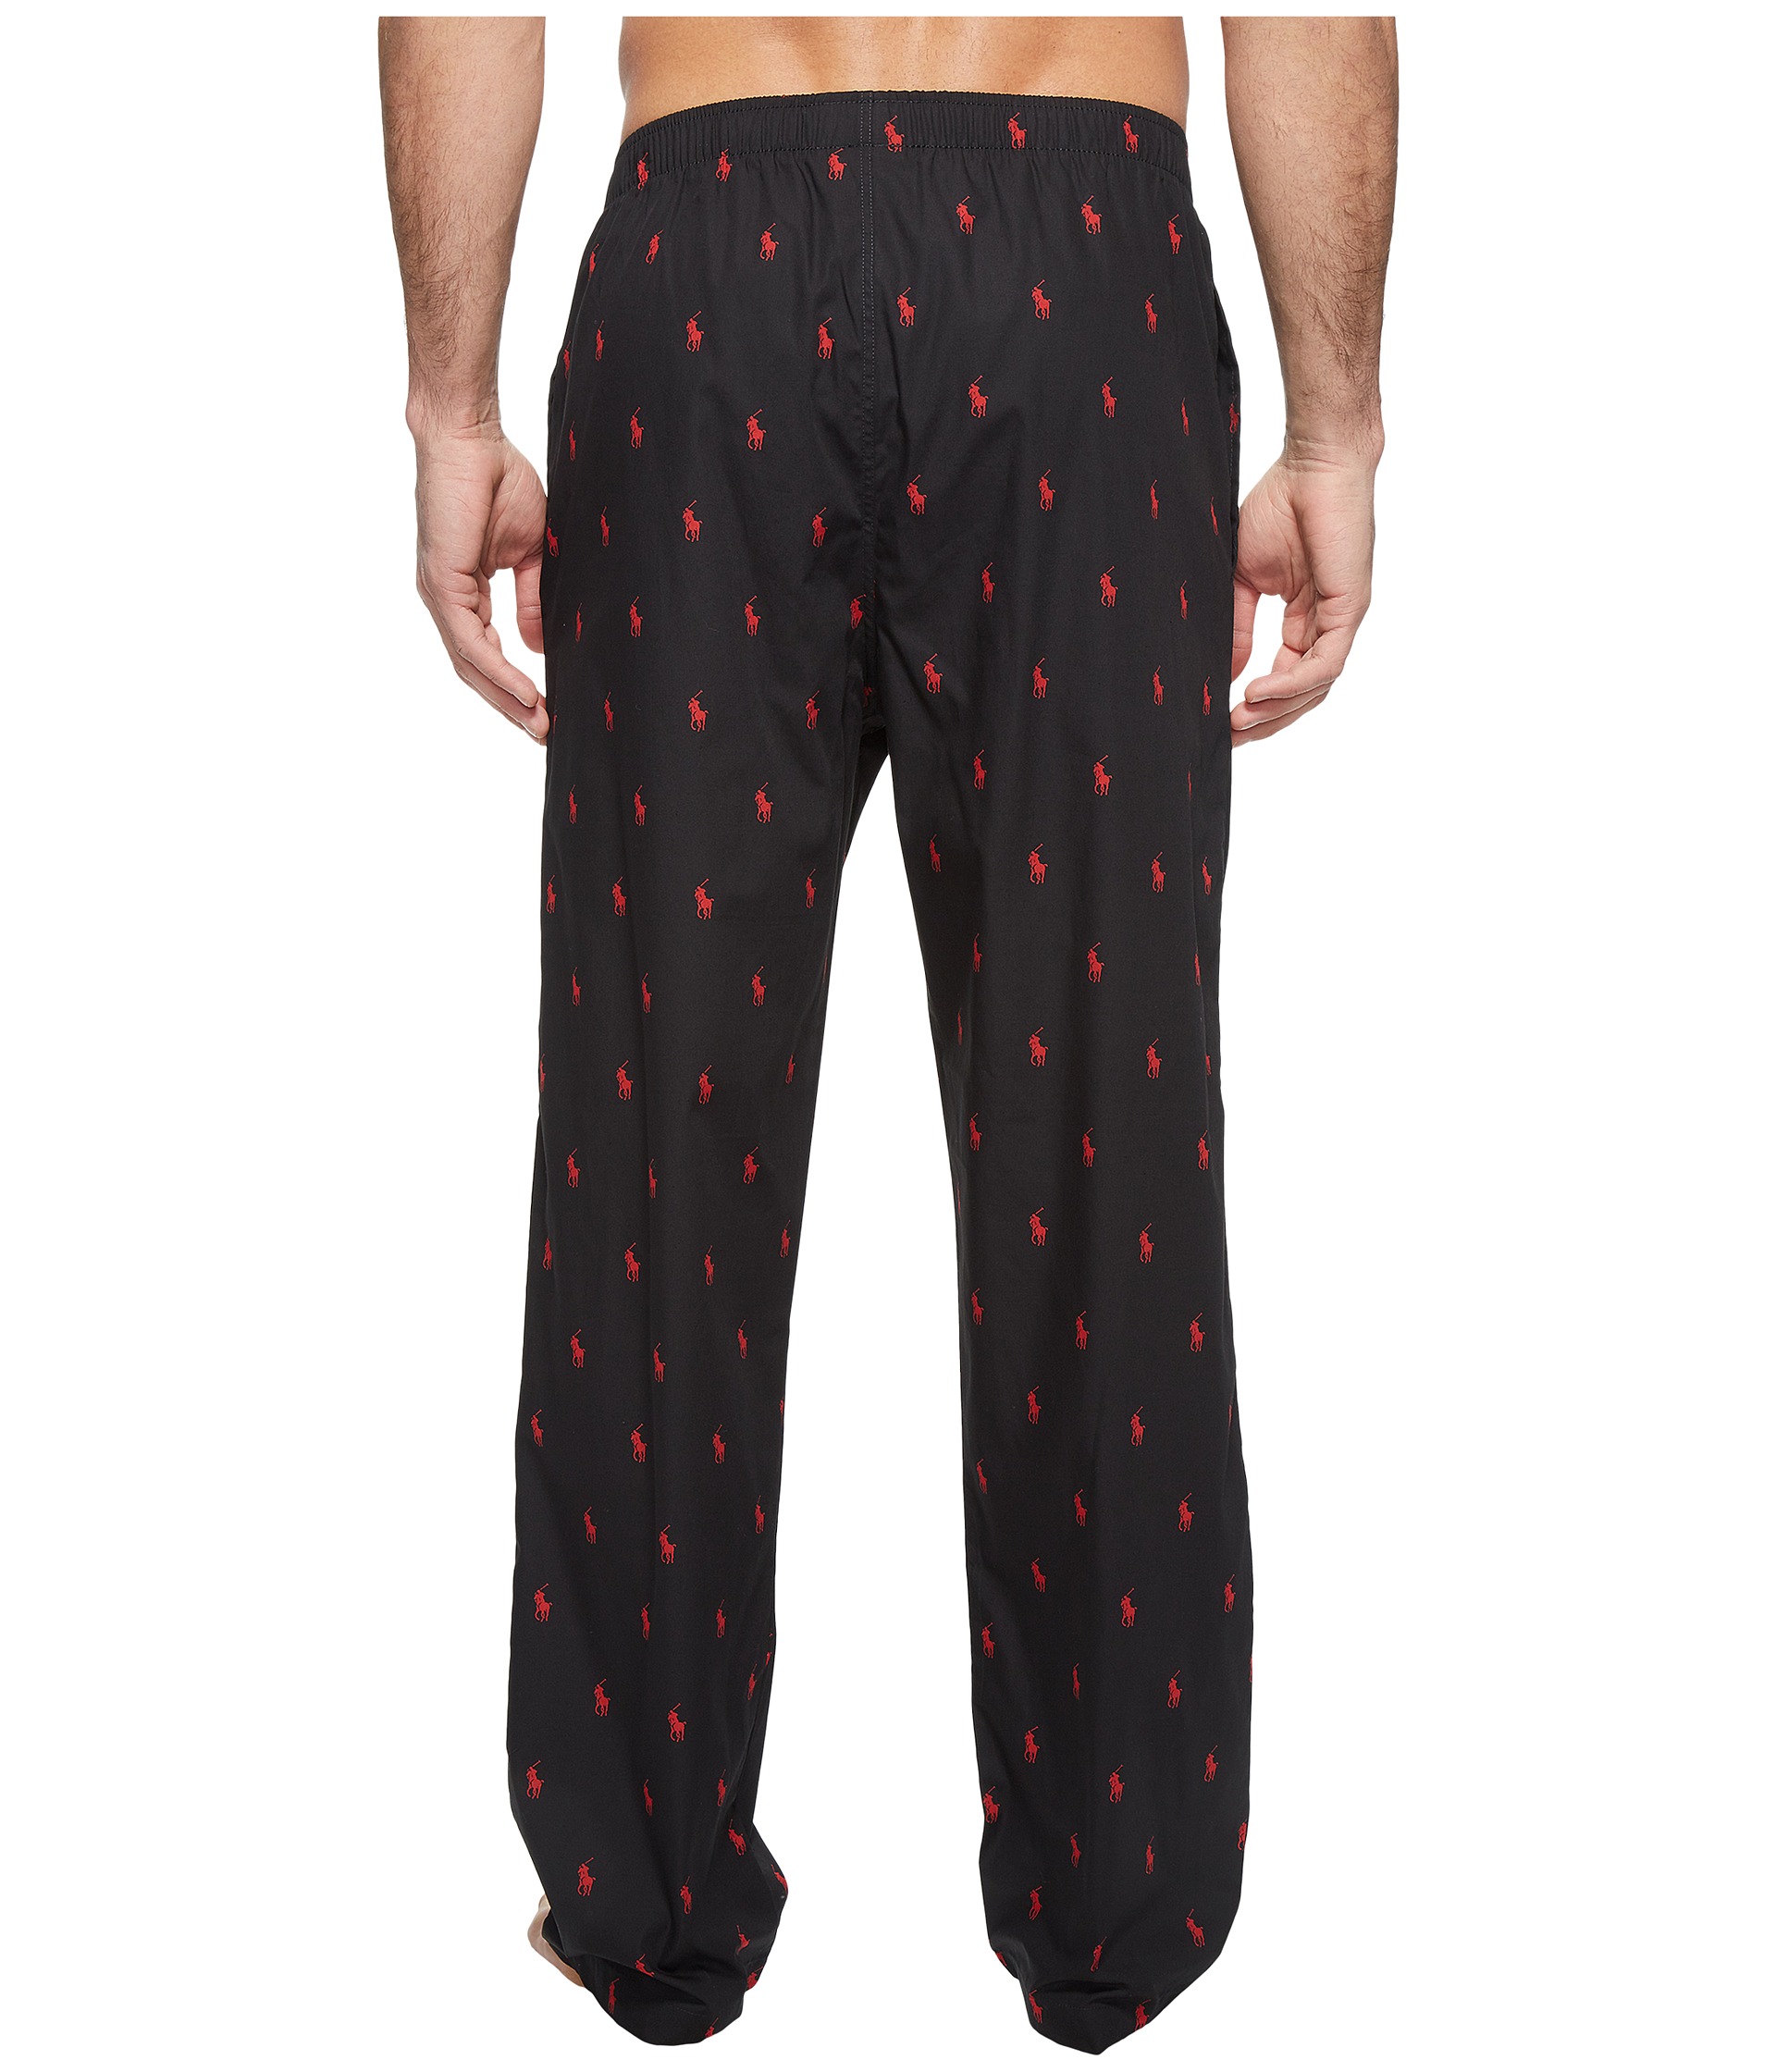 Polo Ralph Lauren All Over Pony Player Woven Pants at Zappos.com